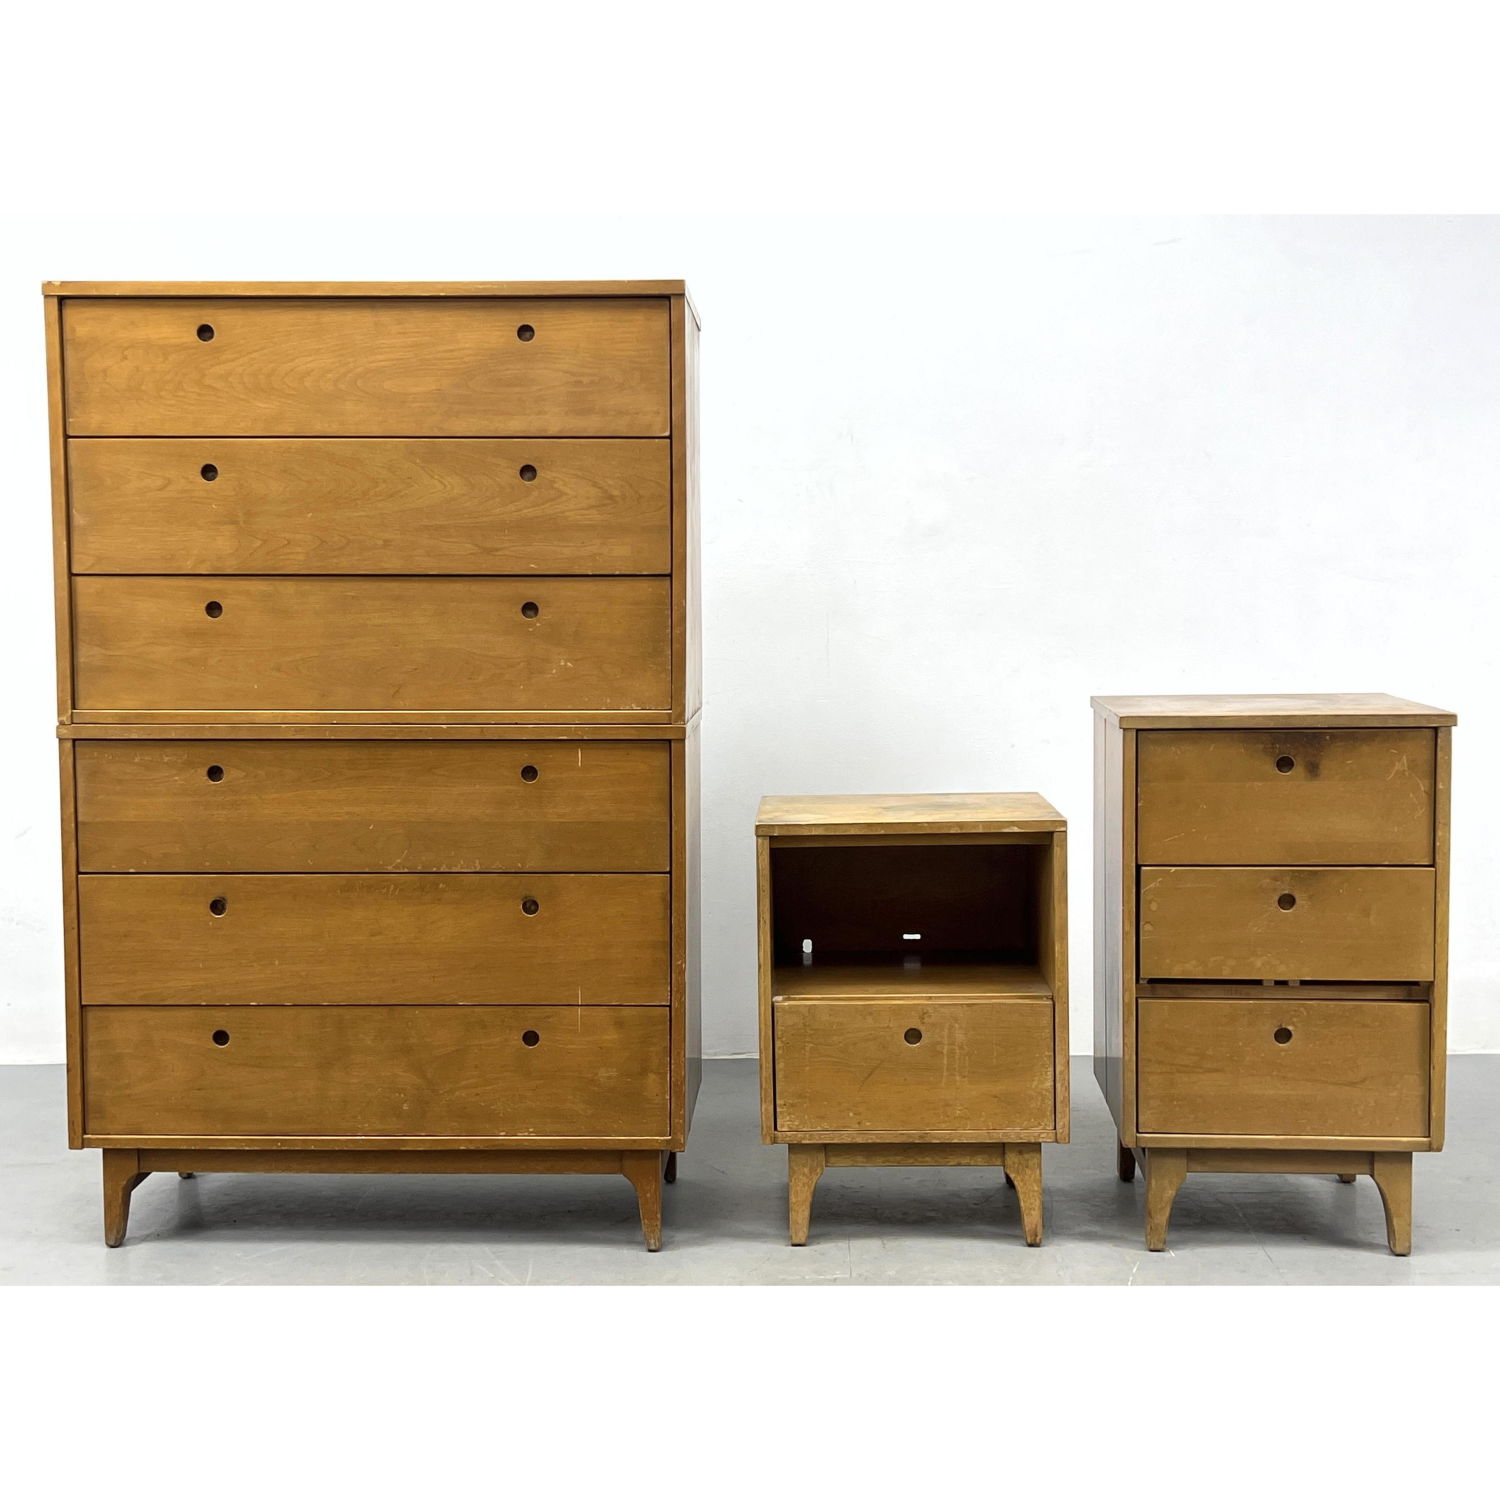 3pc FRENCH and HEALD Bedroom Furniture.